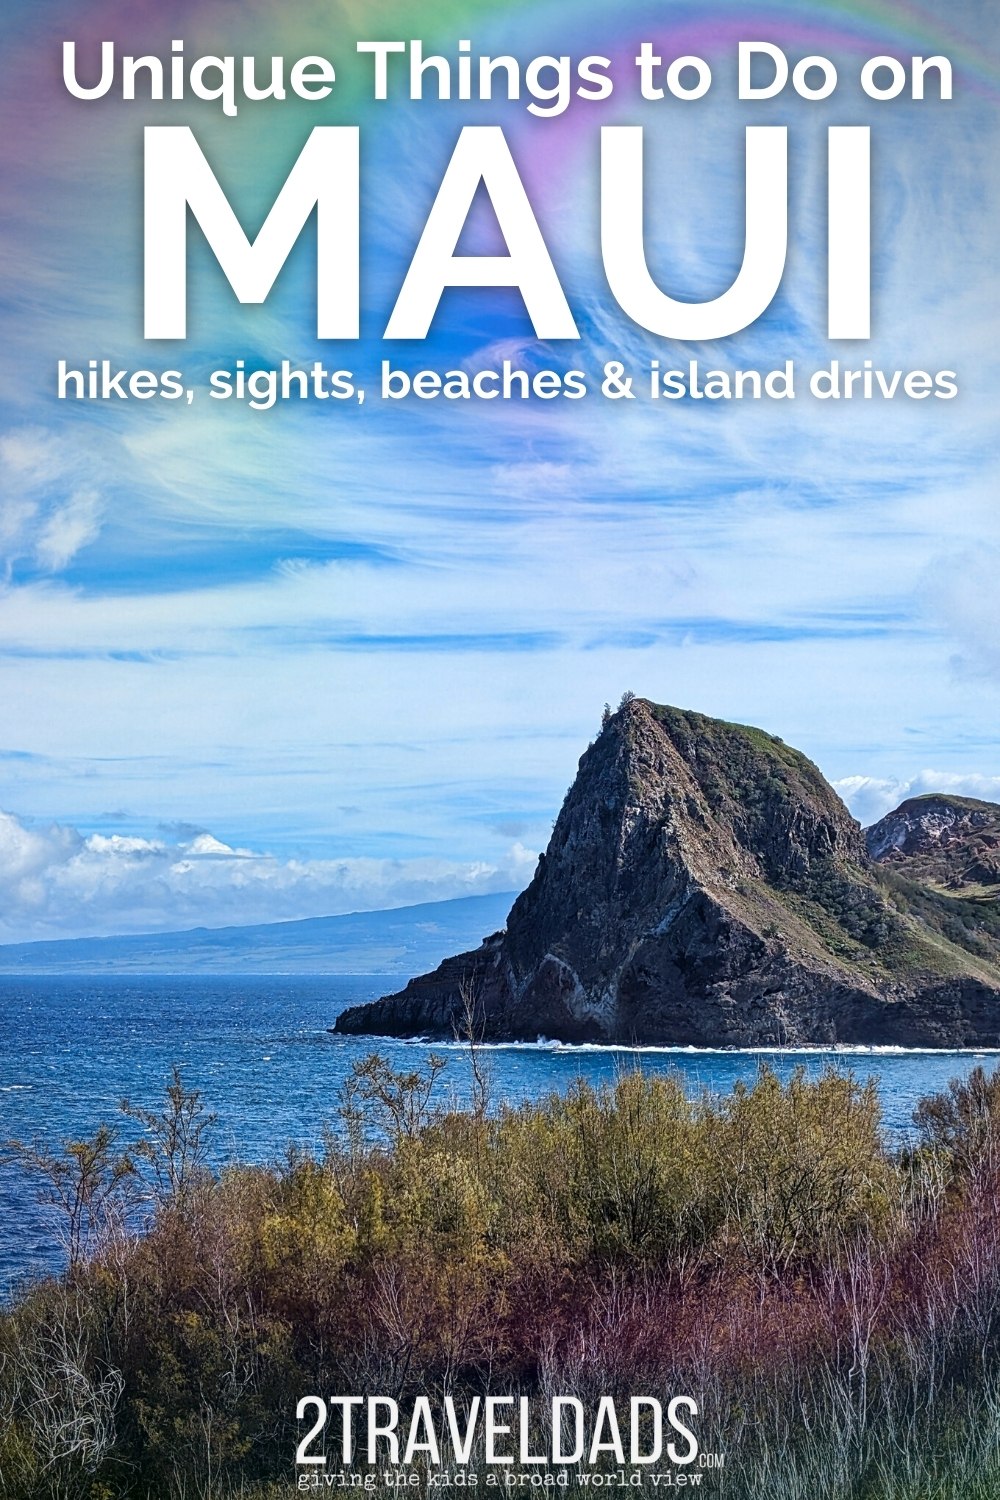 Maui has wonderful, unique things to do that may surprise you. Known for being an island of resorts and development, hiking, beaches and wonderful hidden gems make Maui a great island for a week in Hawaii. Check out things to do, waterfalls for swimming, unique beaches and more.